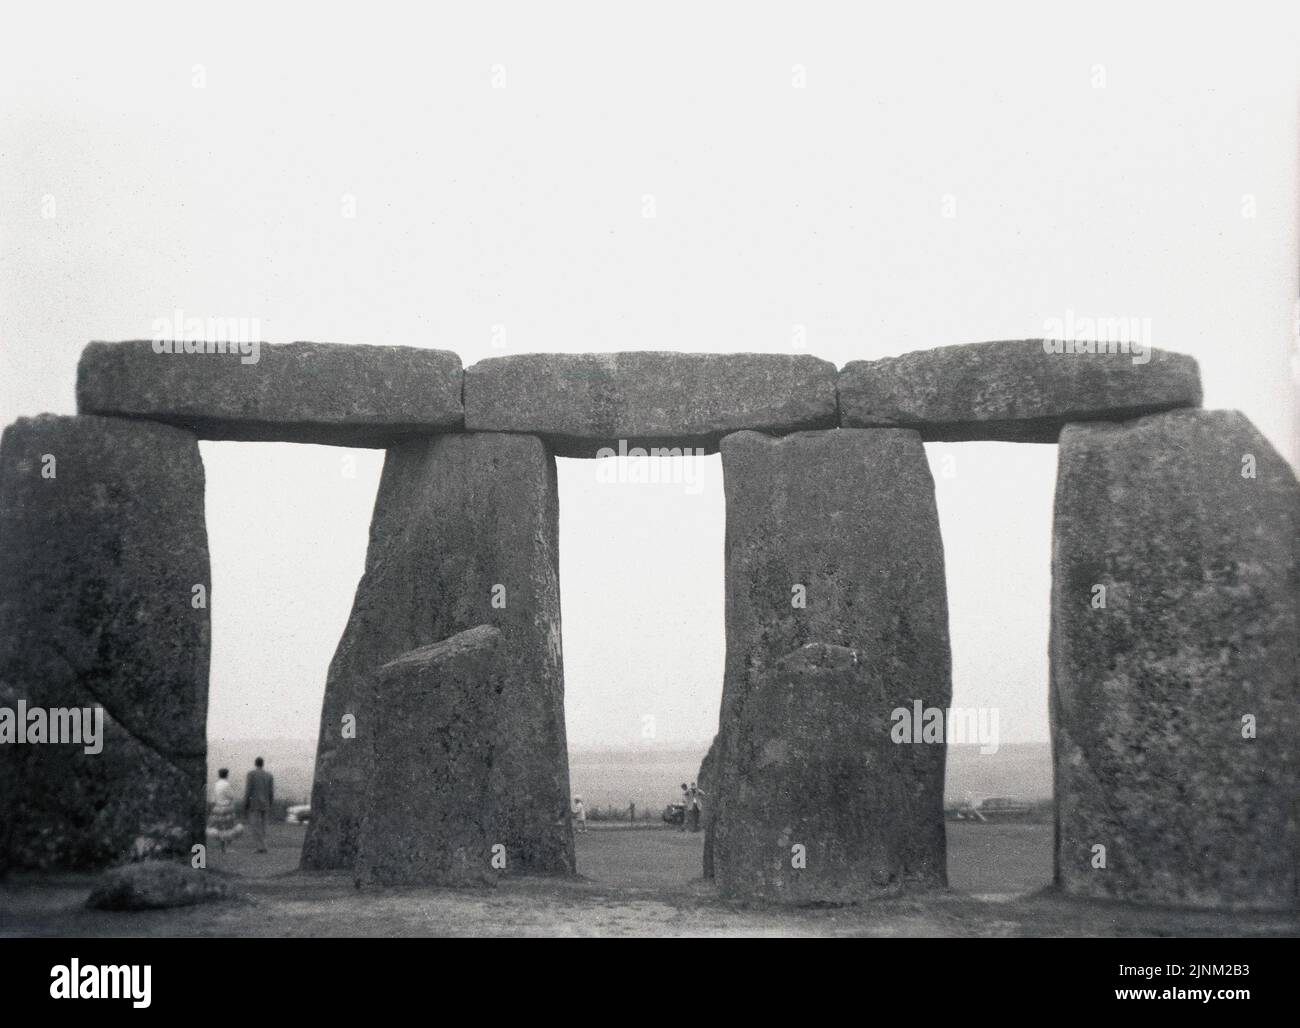 1950s, historical, view from this era of a section of four of the prehistoirc standing stones at Stonehenge on Salisbury Plain in Wiltshire, England, UK.  The whole monument consists of an outer ring of vertical sarsen standing stones, approx 13 feet high and seven feet wide, and weighing around 25 tons, topped by connecting horizontal lintel stones. Stock Photo